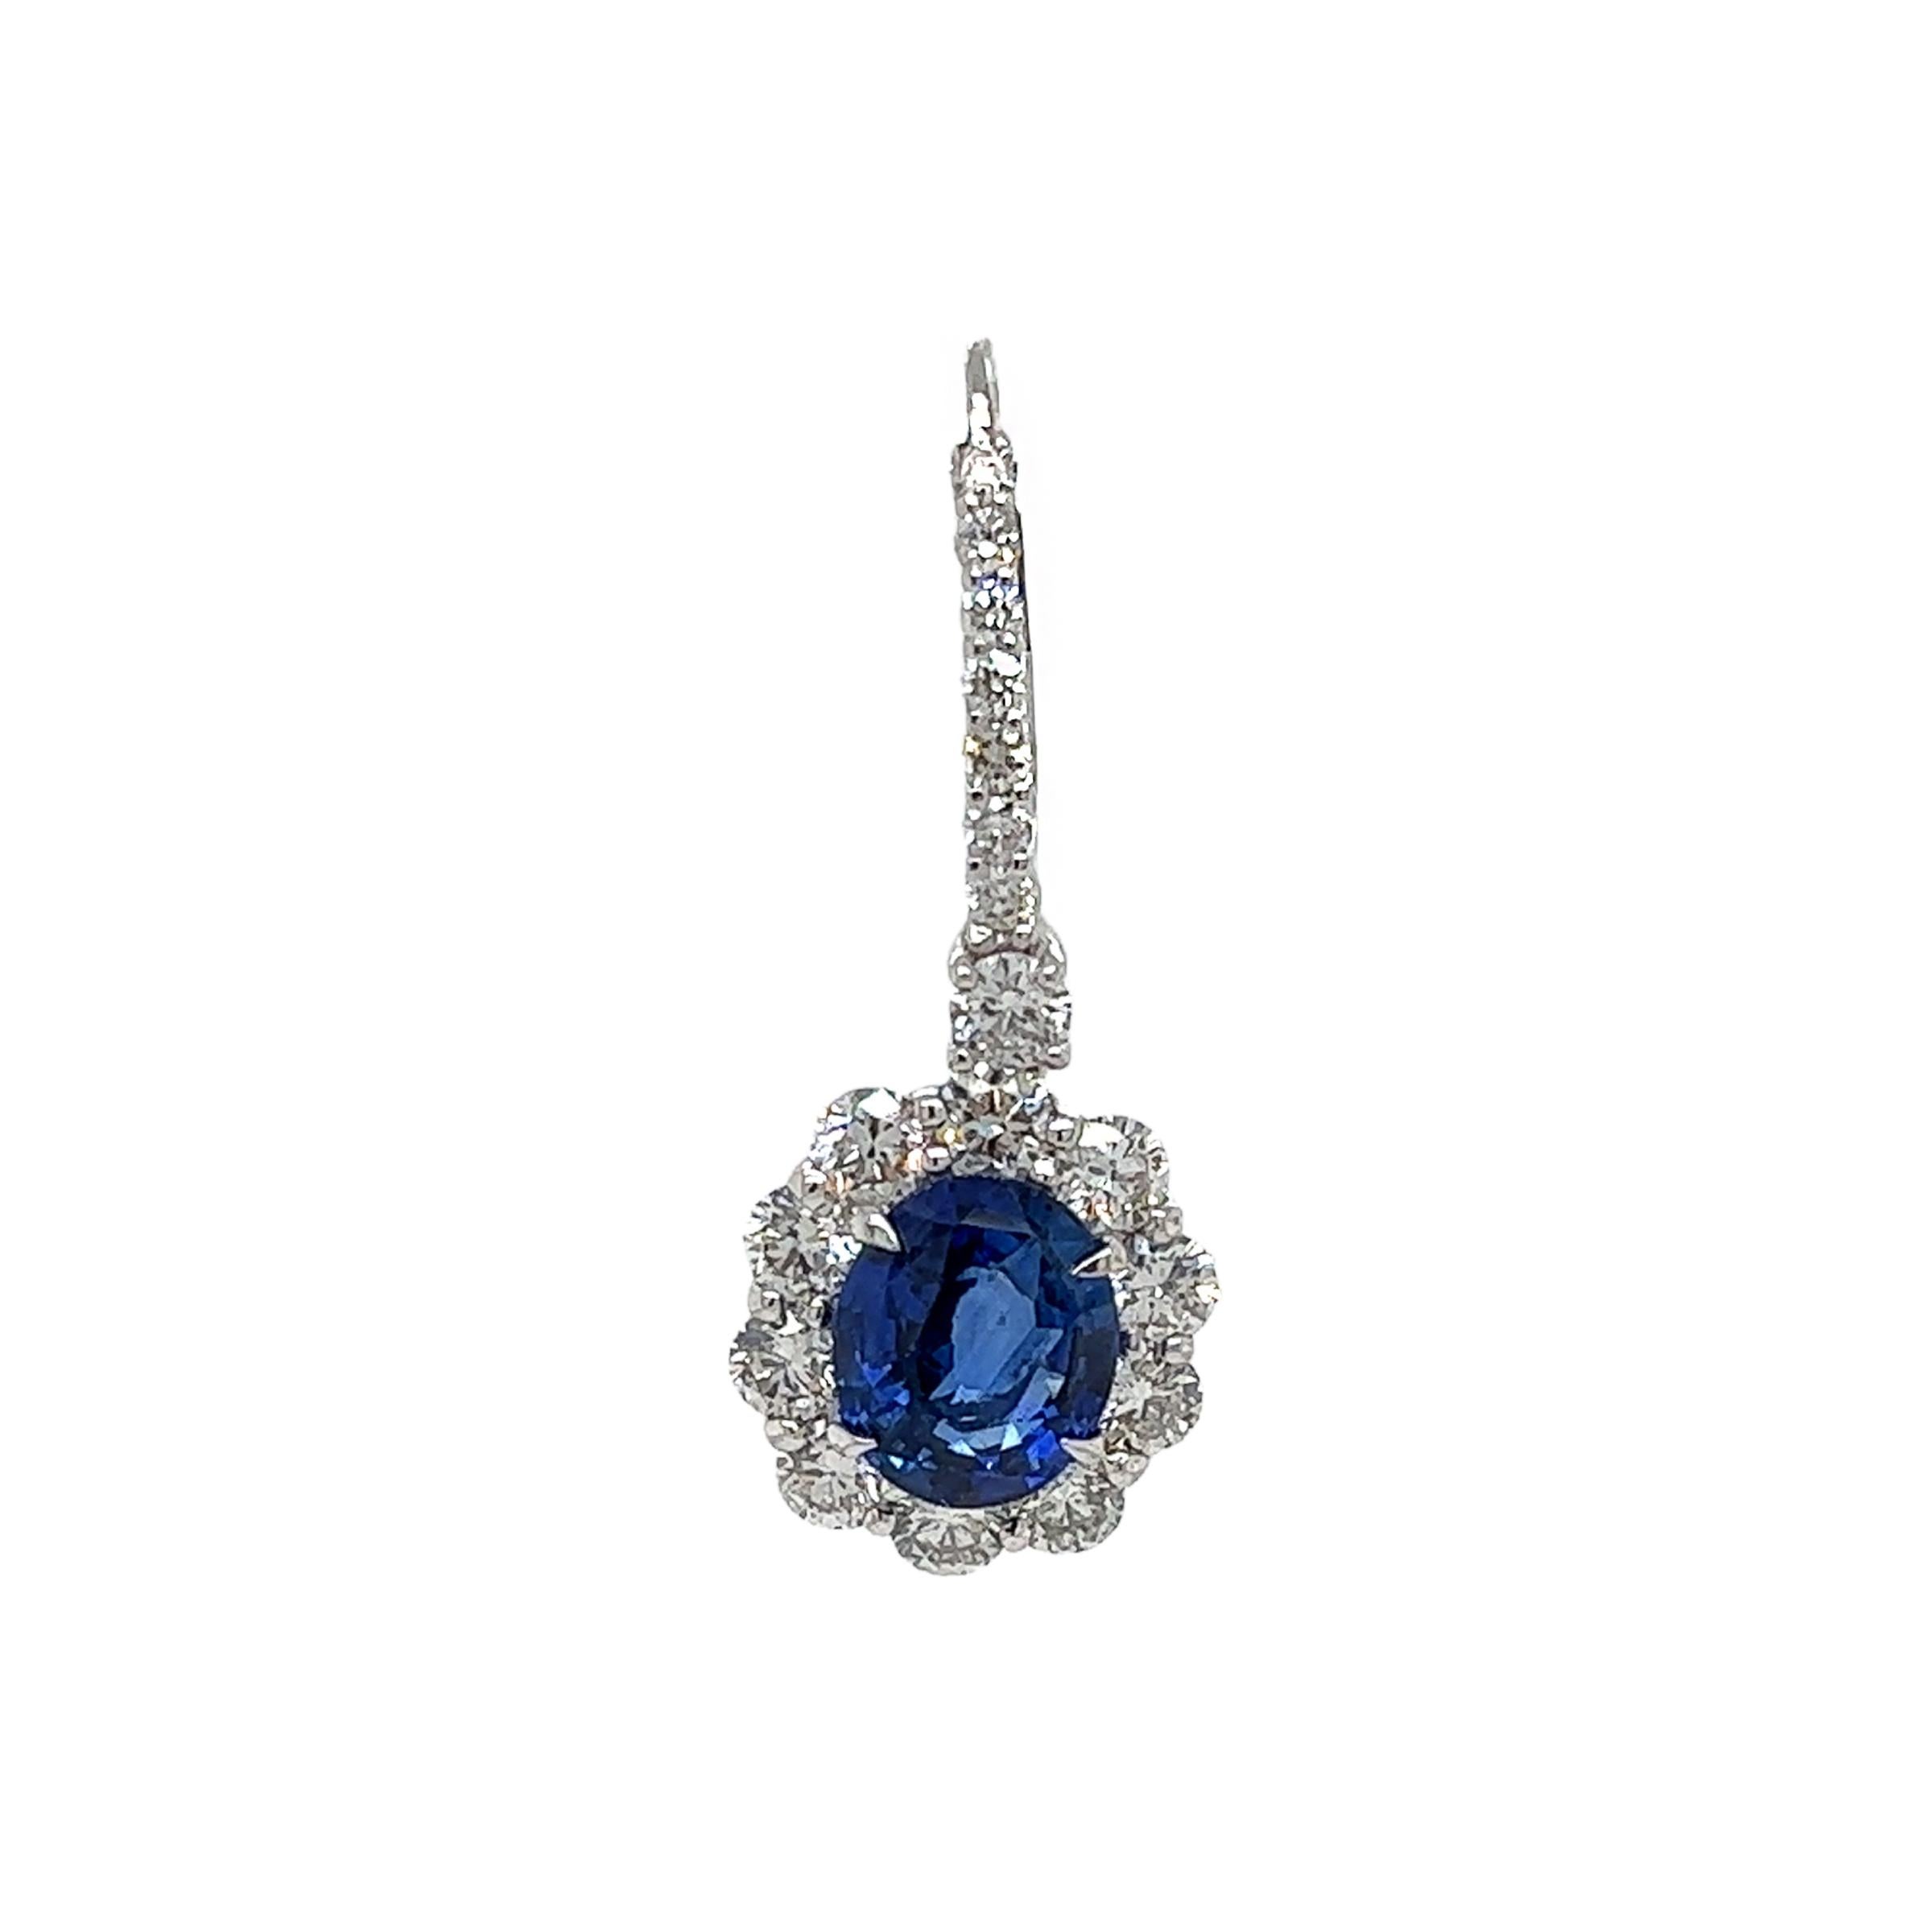 Oval Cut 9.26 Total Carat Blue Sapphire and Diamond Drop Earrings in Platinum For Sale